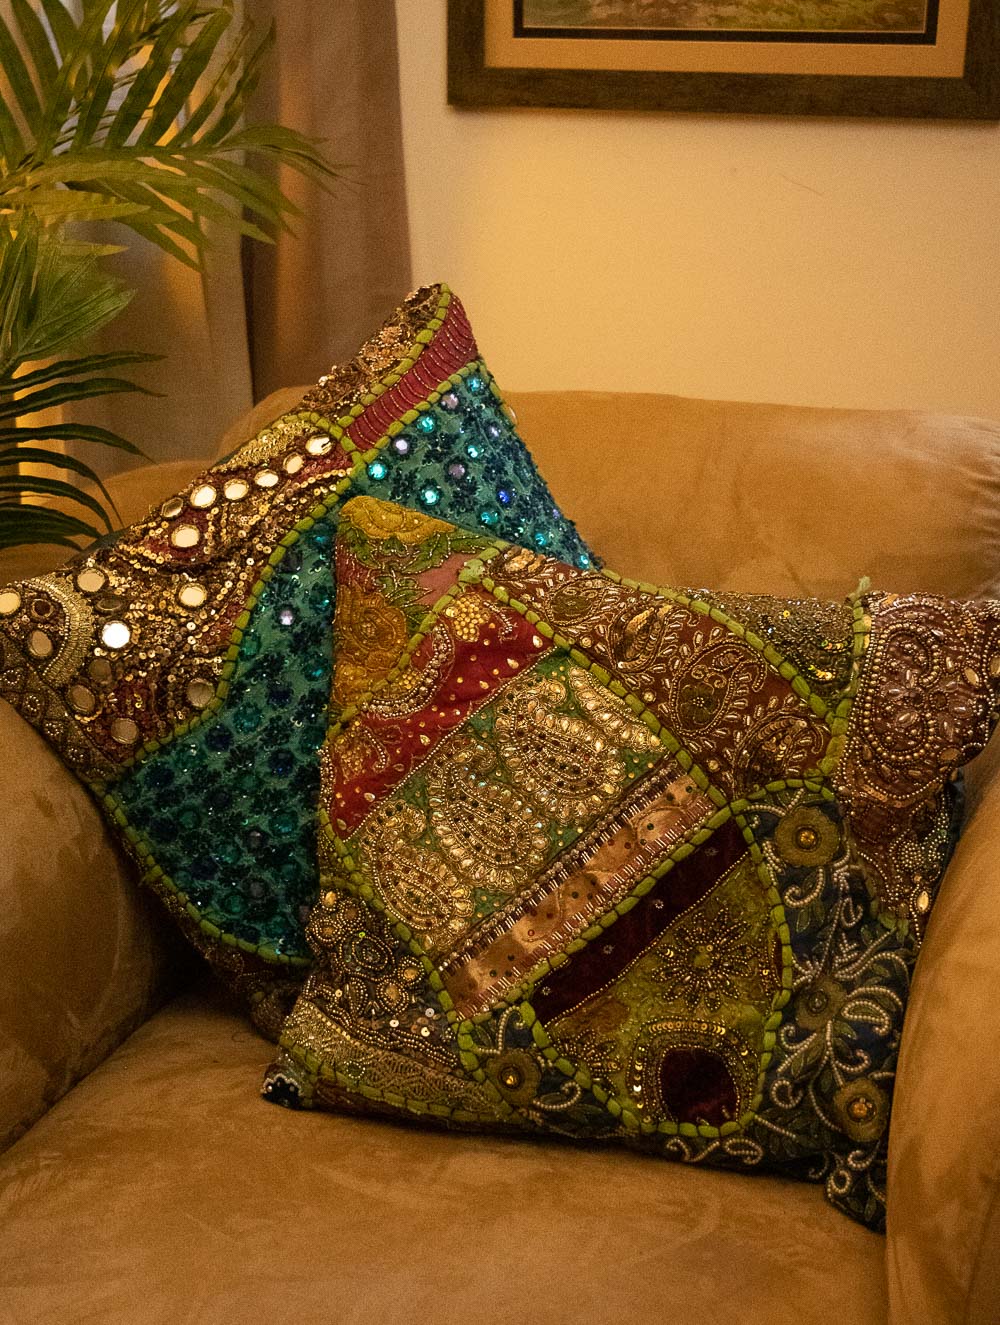 Load image into Gallery viewer, Zari Patchwork Cushion Covers (Set of 2)